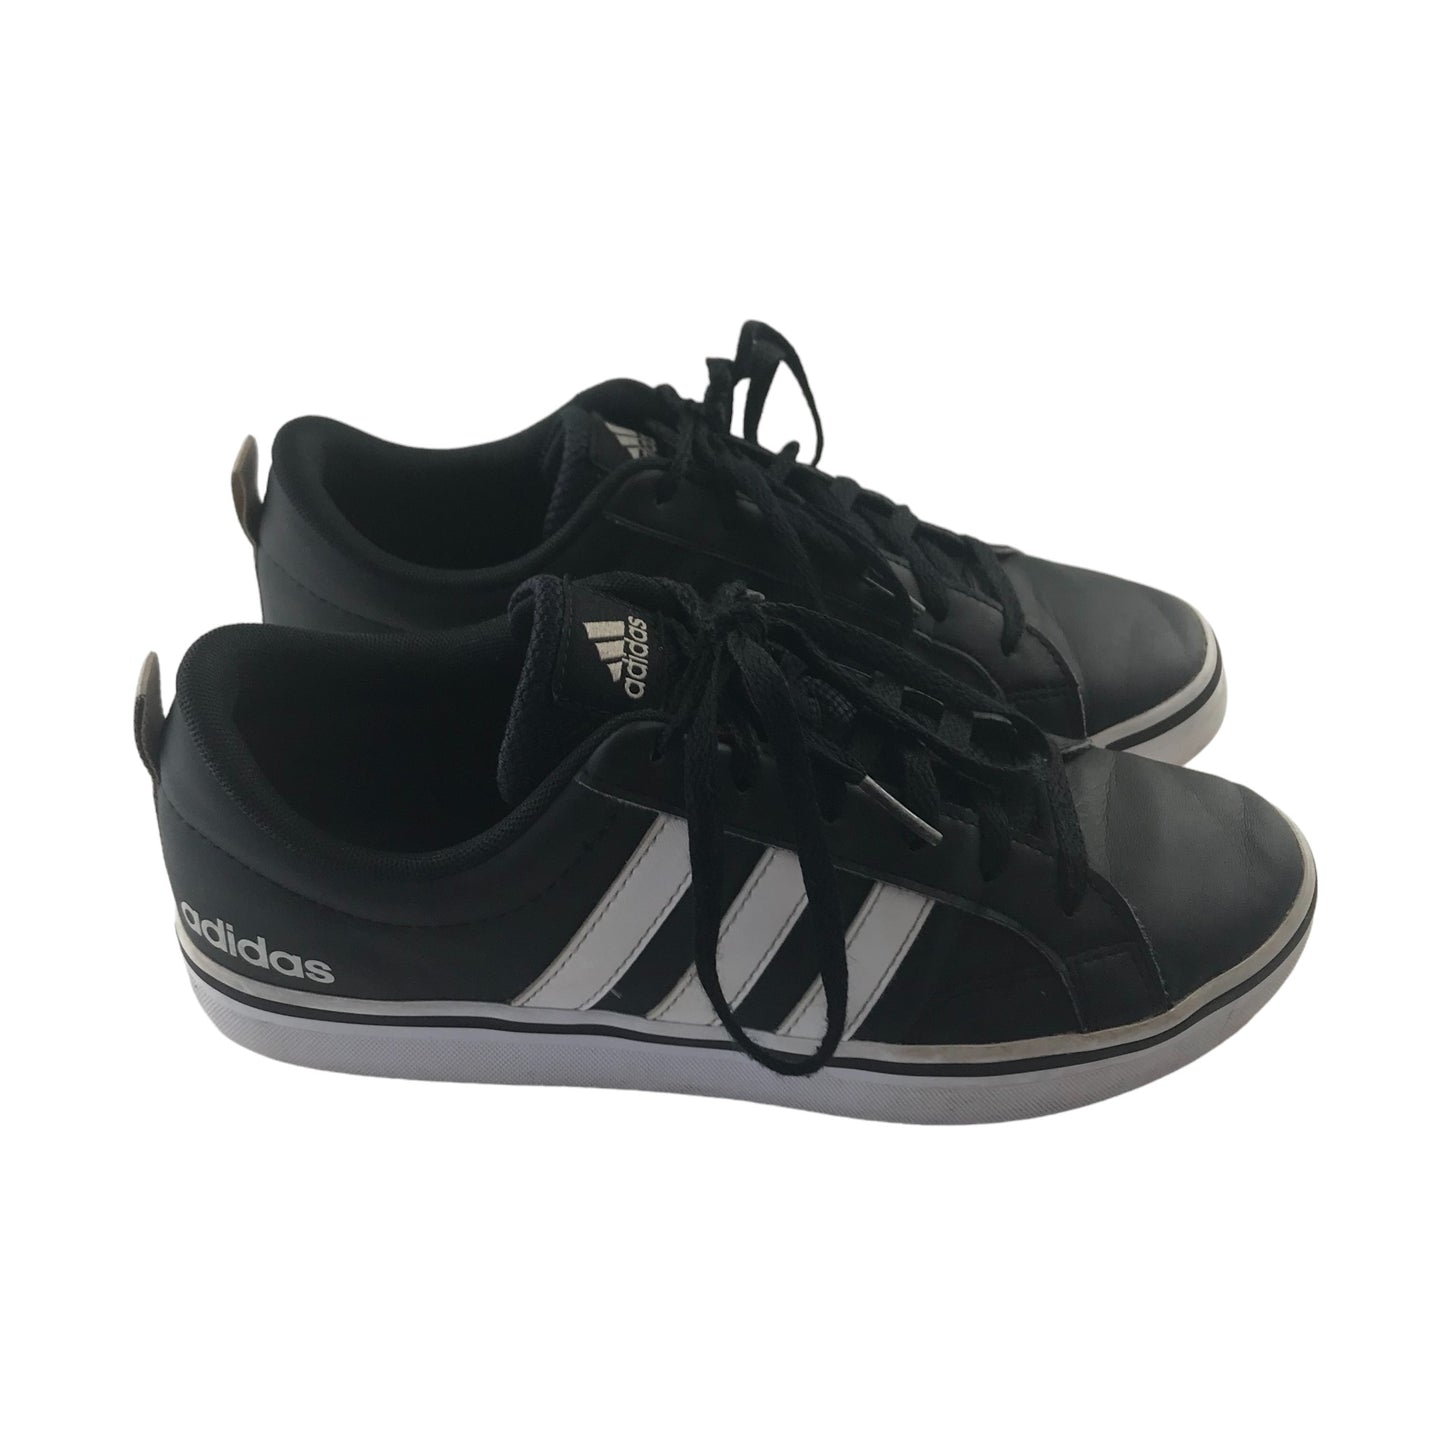 Adidas Trainers Shoe Size 7 Black with 3 Stripes and Logo on Tongue